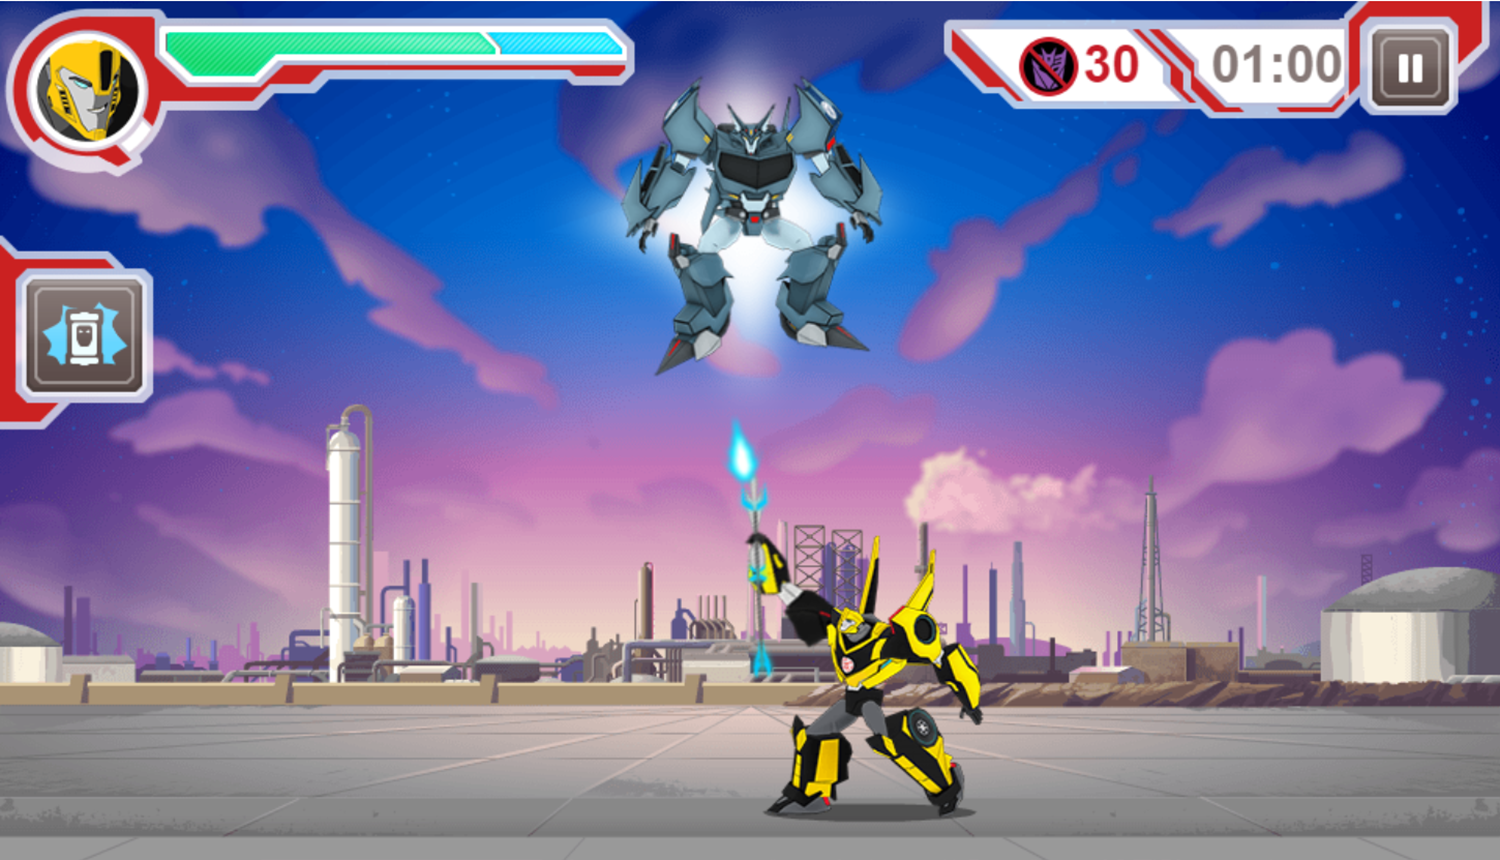 Transformers Protect Crown City Game Boss Fight Start Screenshot.